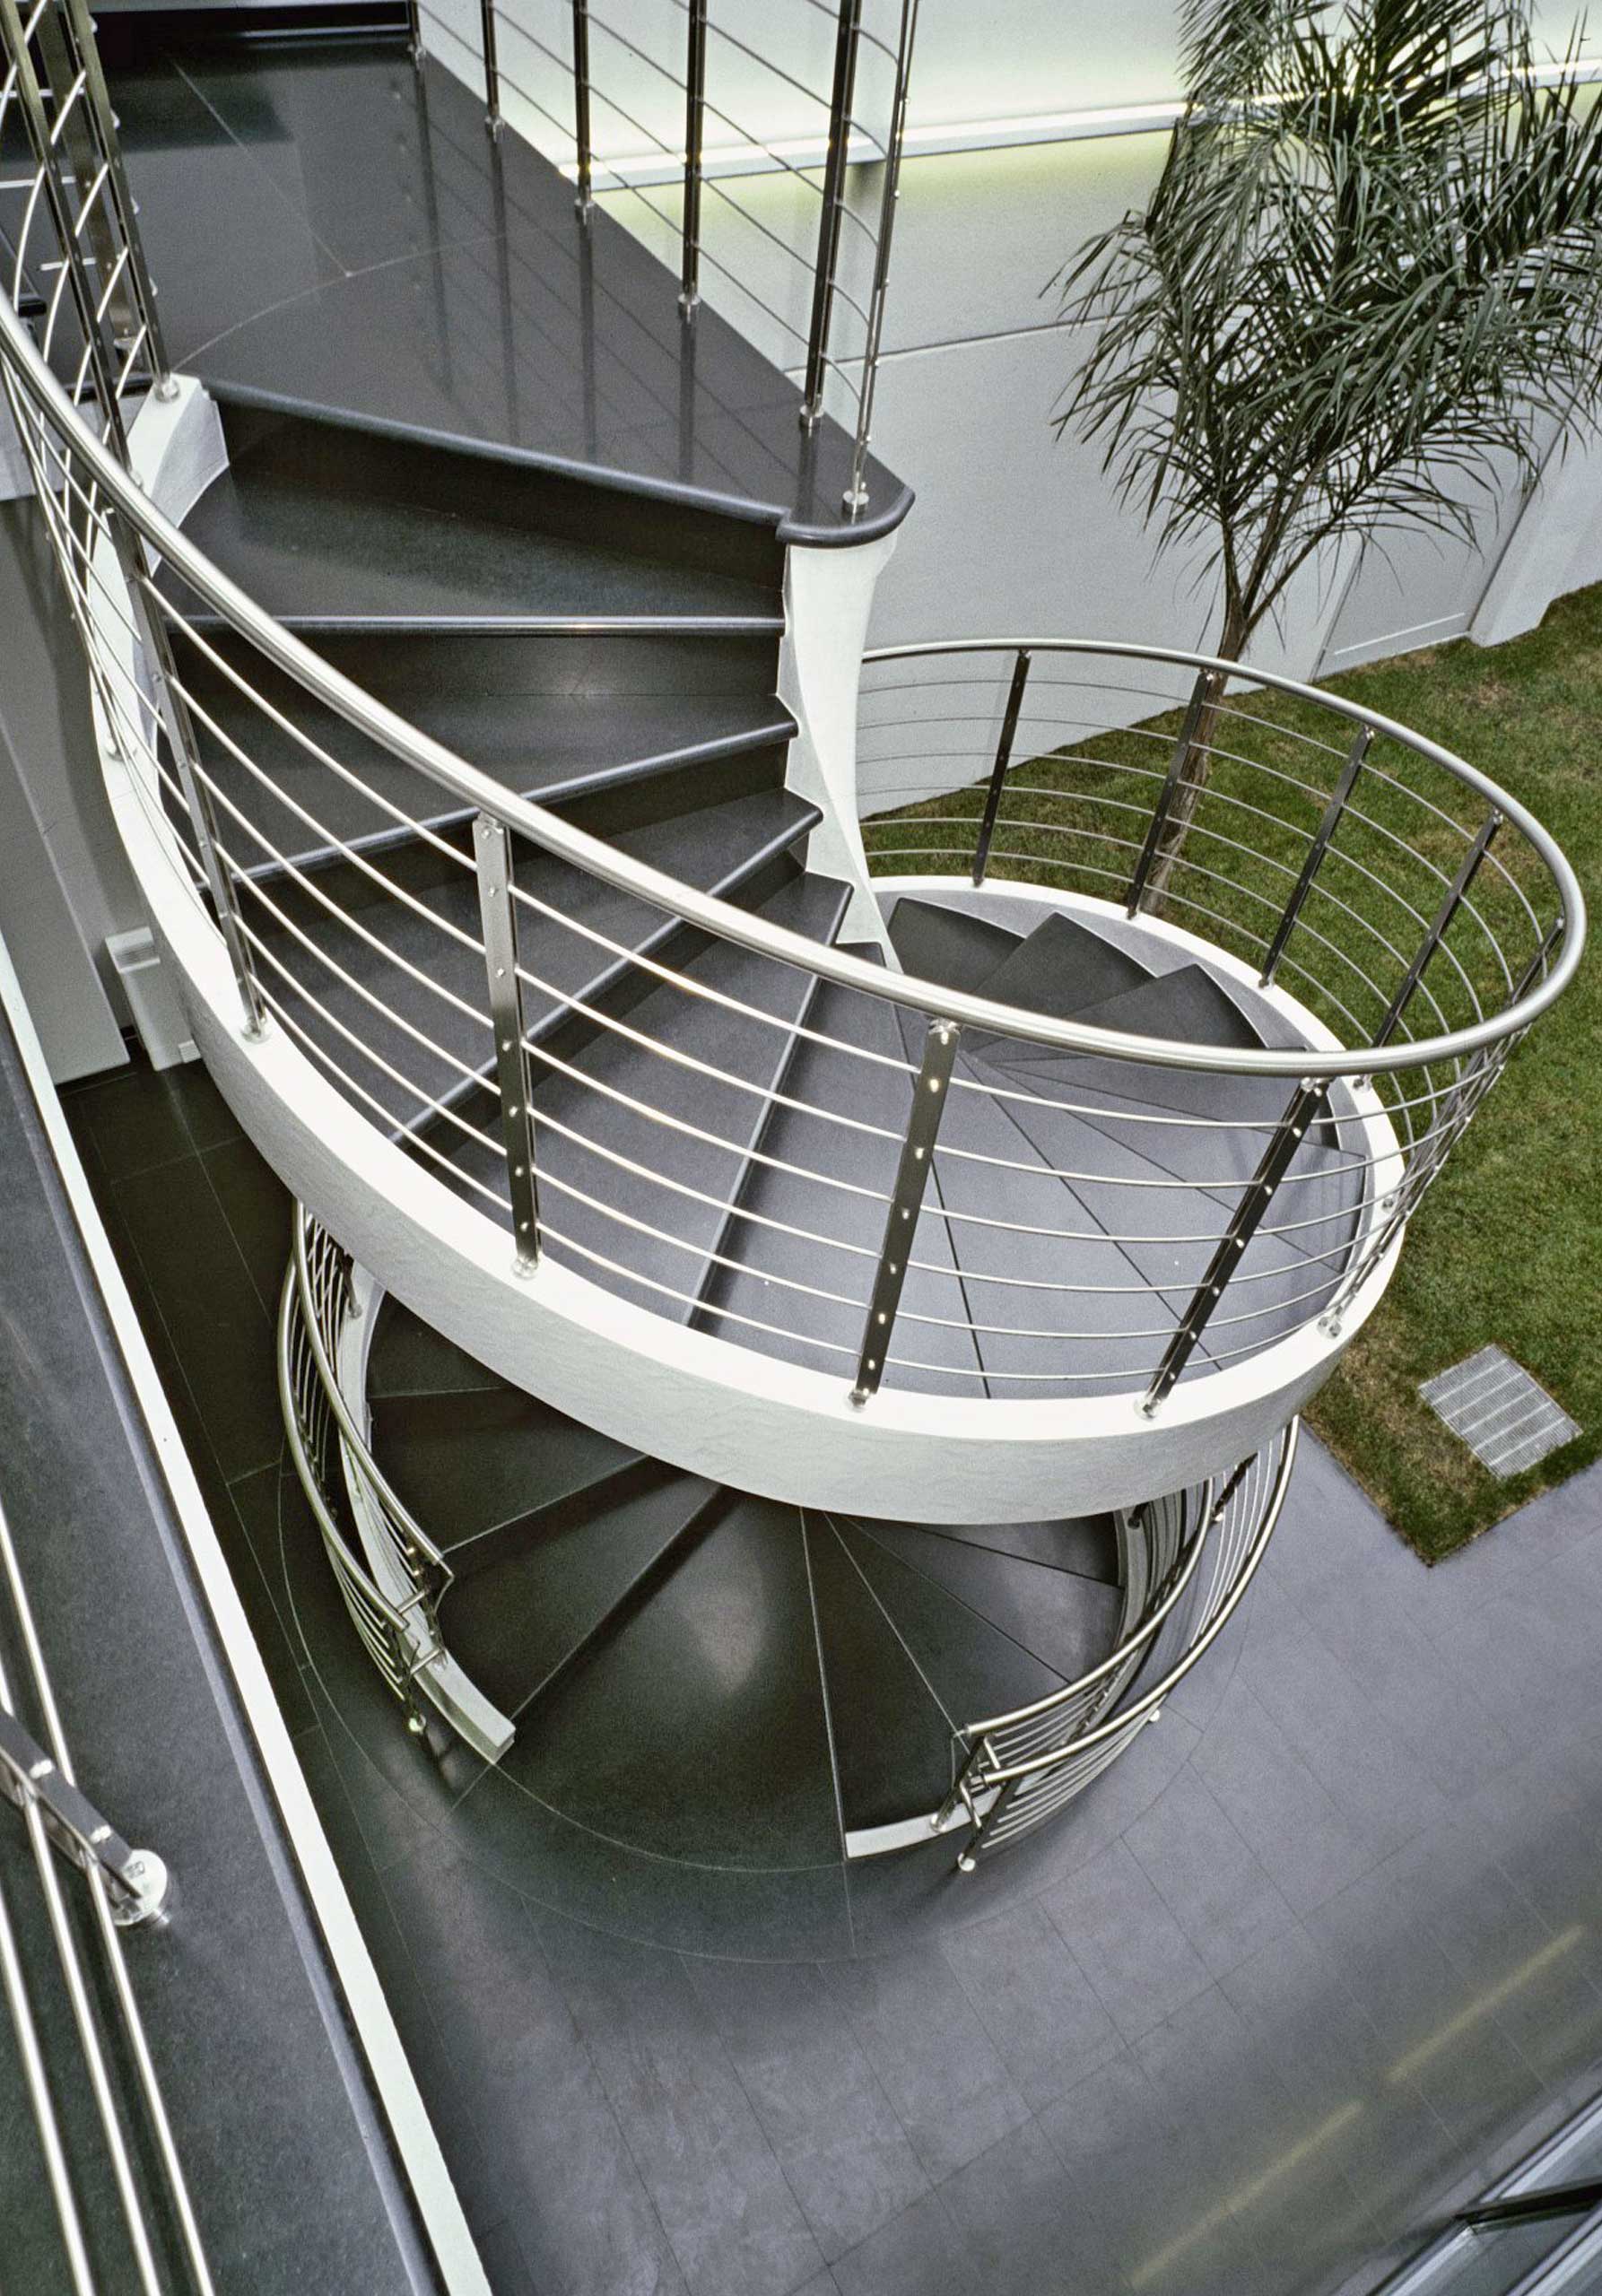 Handcrafted railings for indoor and outdoor staircases